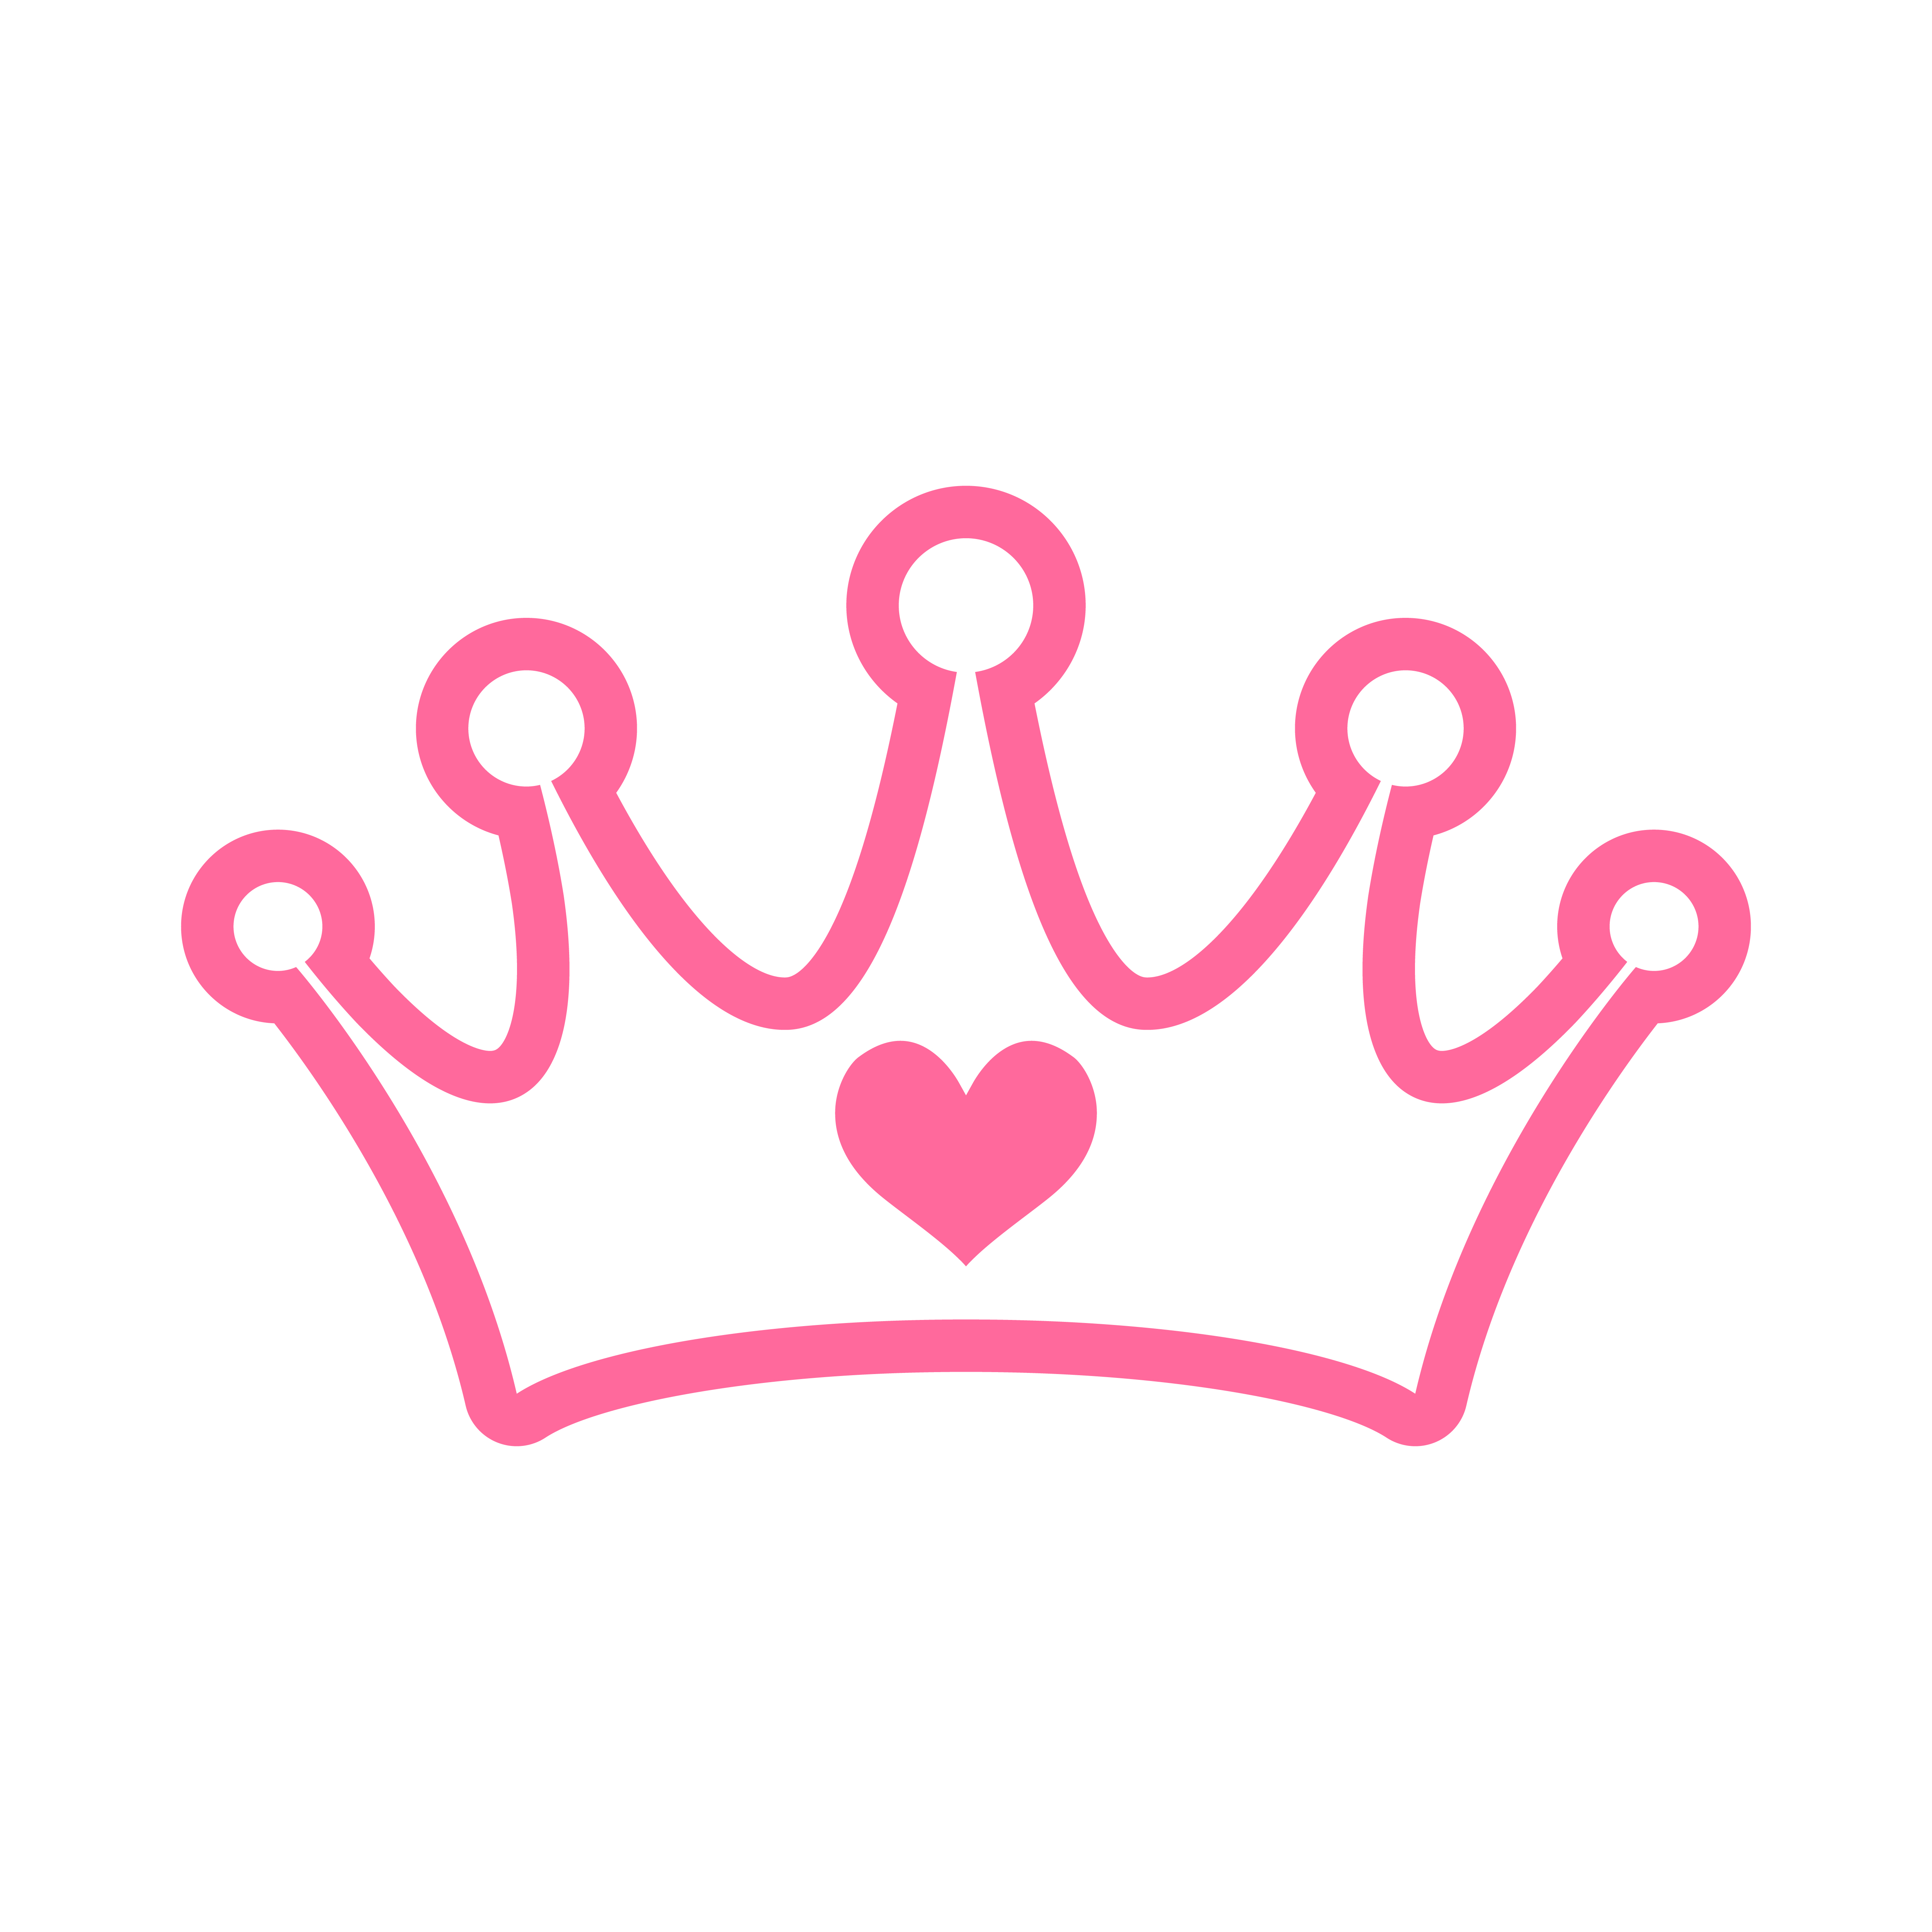 Download Pink Girly Princess Royalty Crown With Heart Jewels 554891 ...